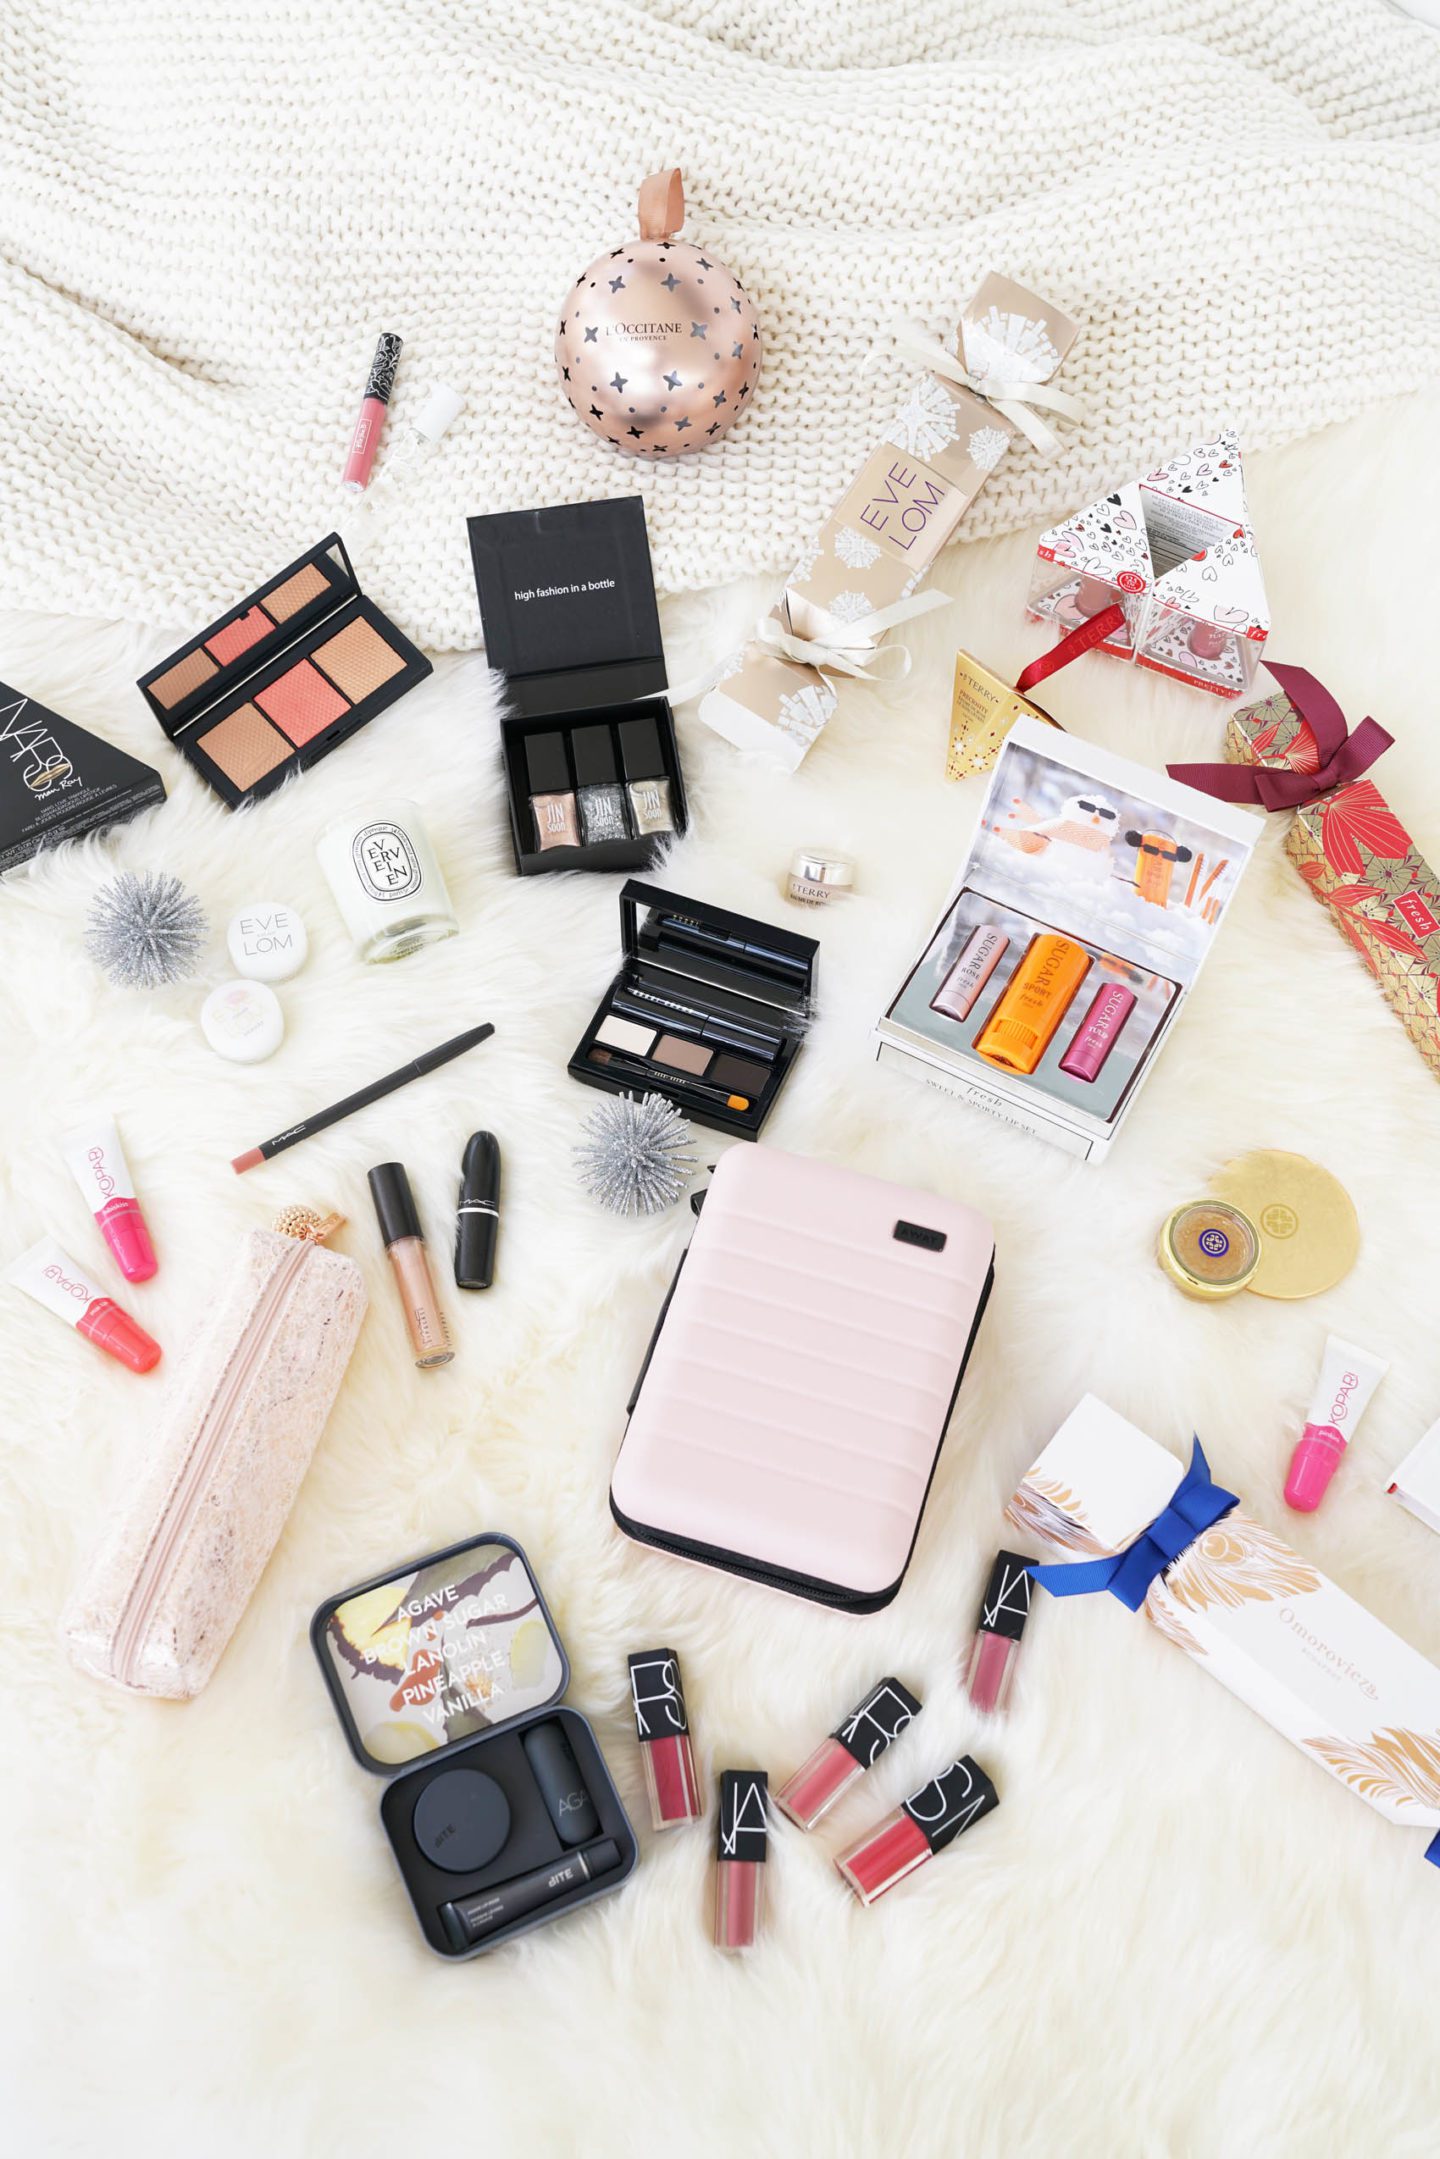 Best Holiday Gifts Under $50 for the beauty junkie | The Beauty Look Book